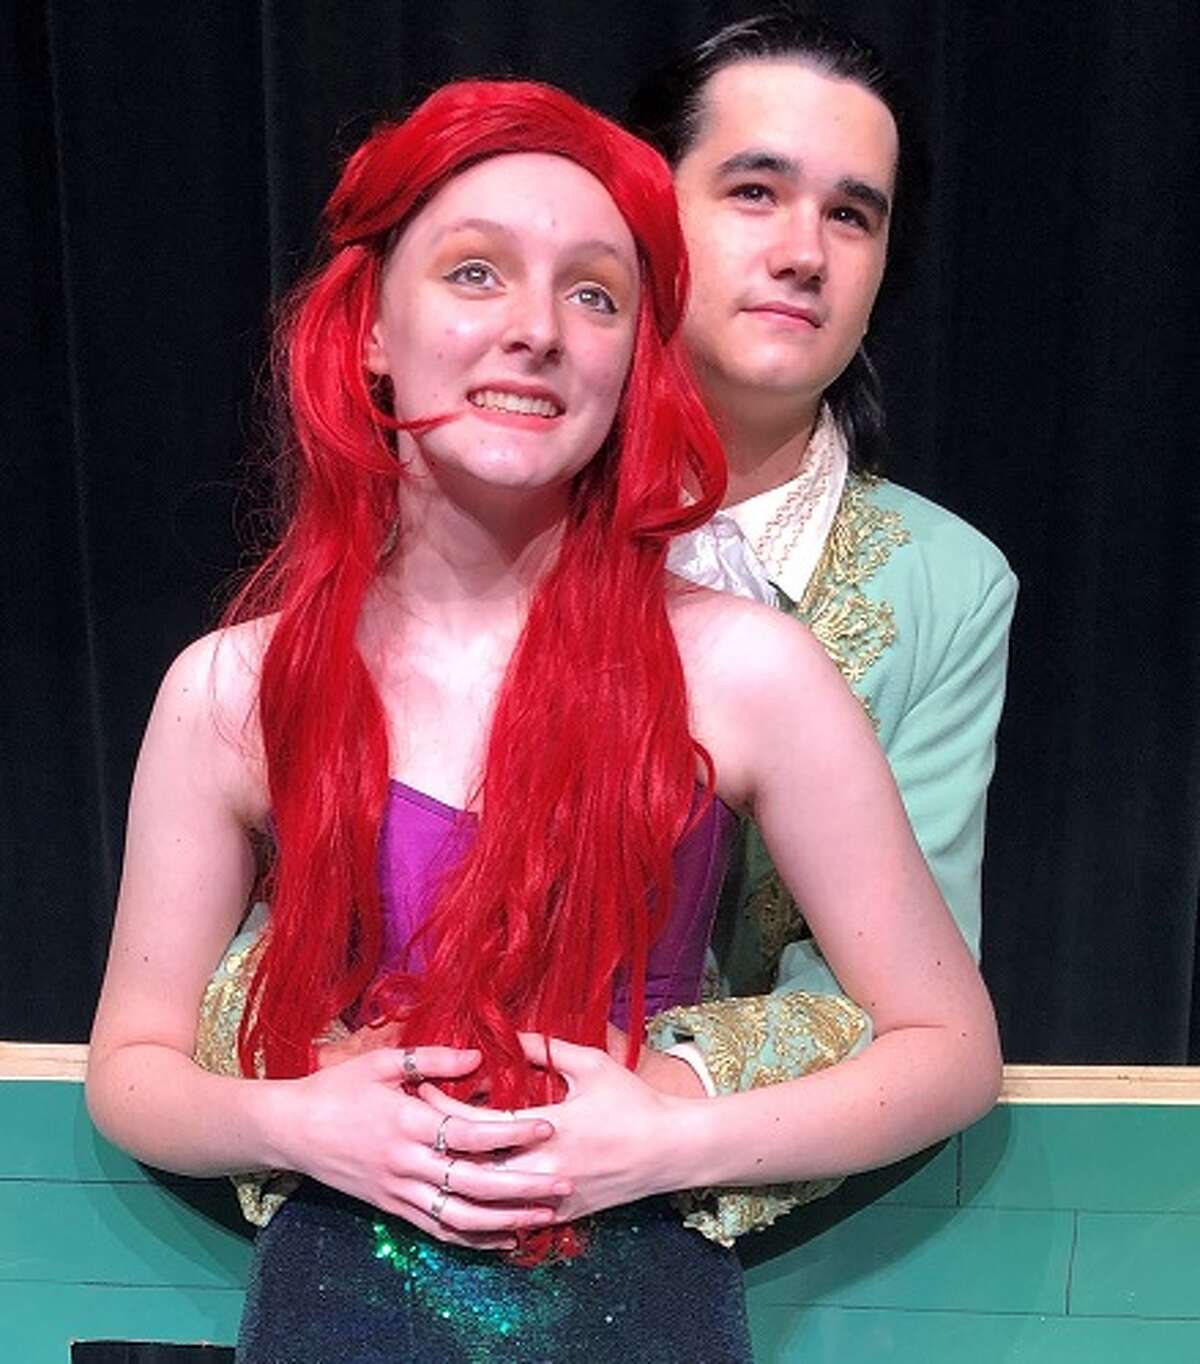 Devon Baxa plays Ariel and Noah Bryant is Prince Eric in Alvin High School's production of "The Little Mermaid."